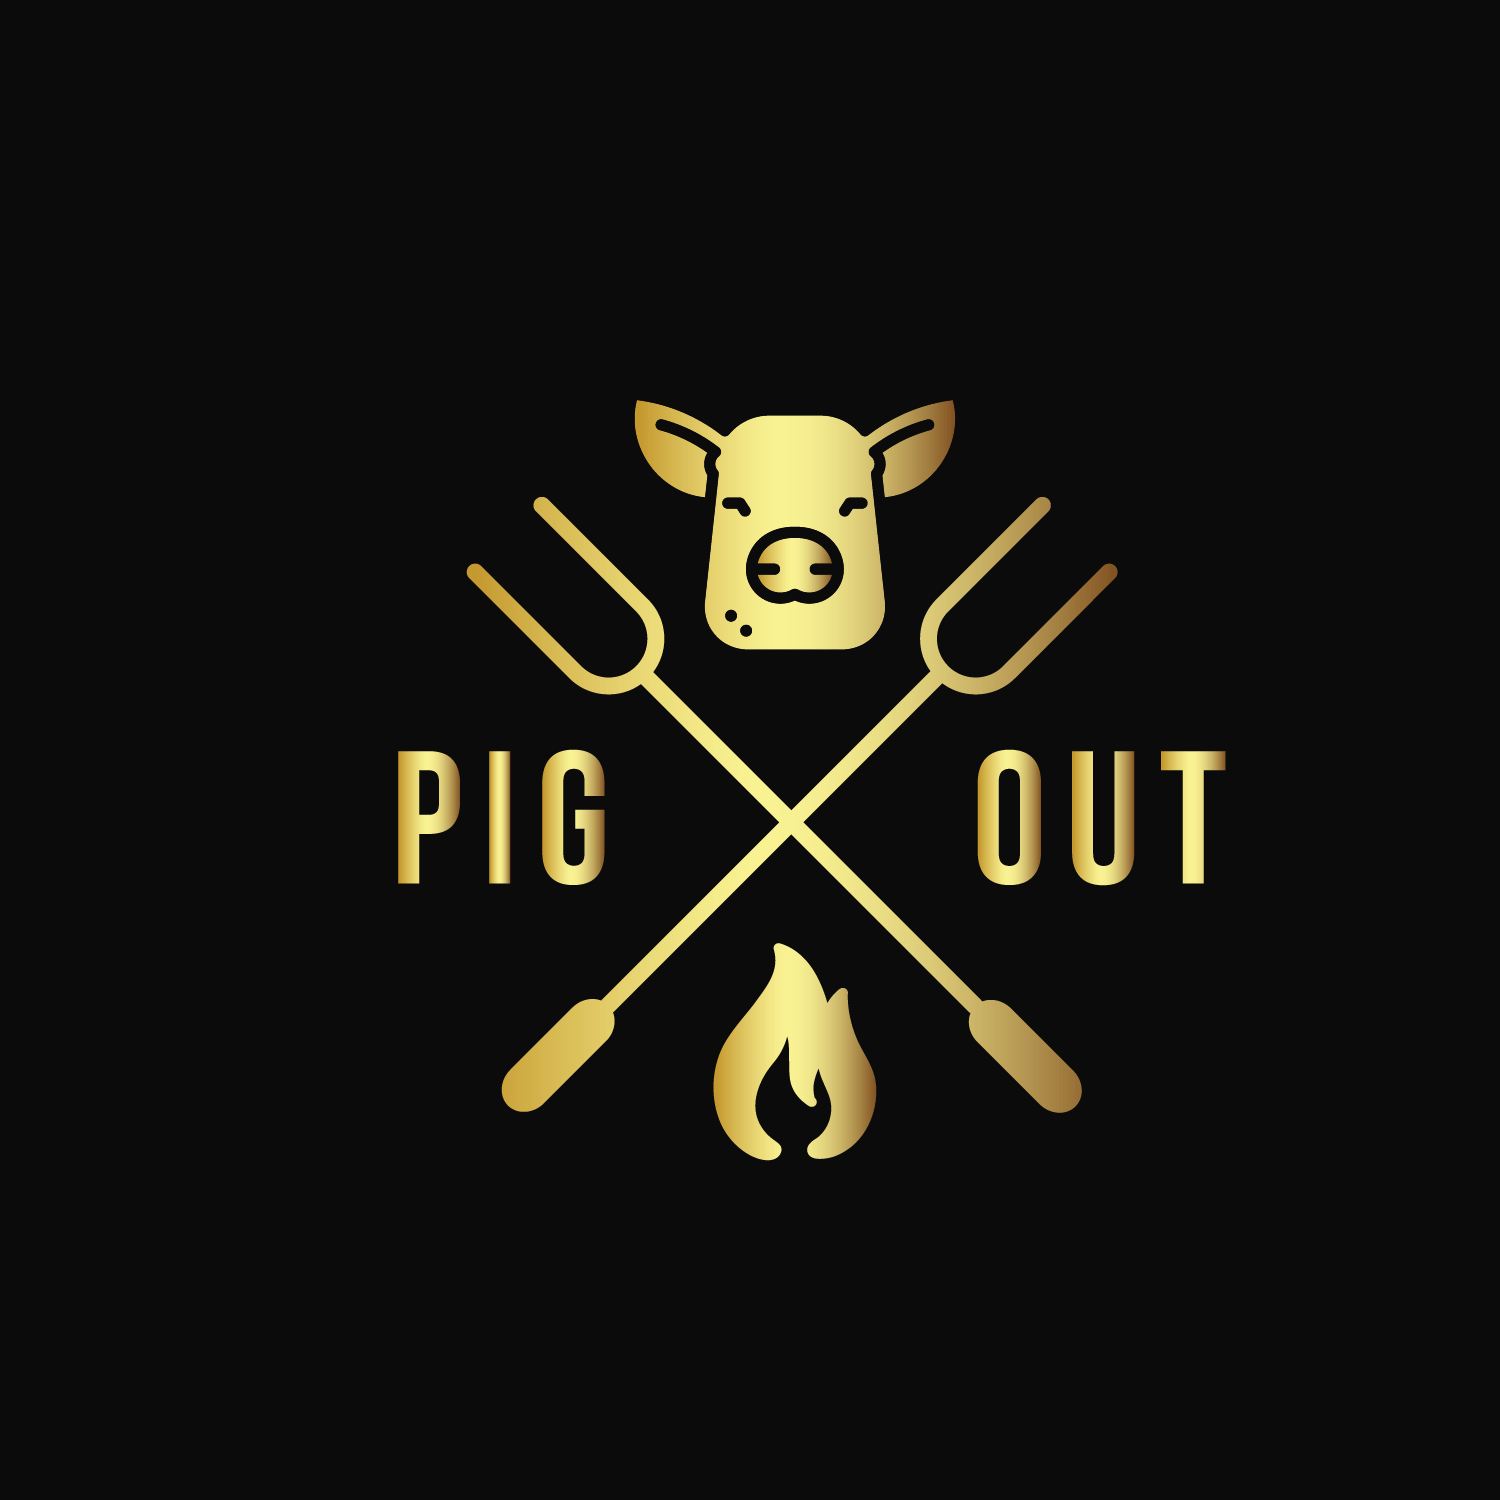 Whiskey Group Logo - Bold, Playful, Manufacturing Logo Design for Pig Out! by Descom ...